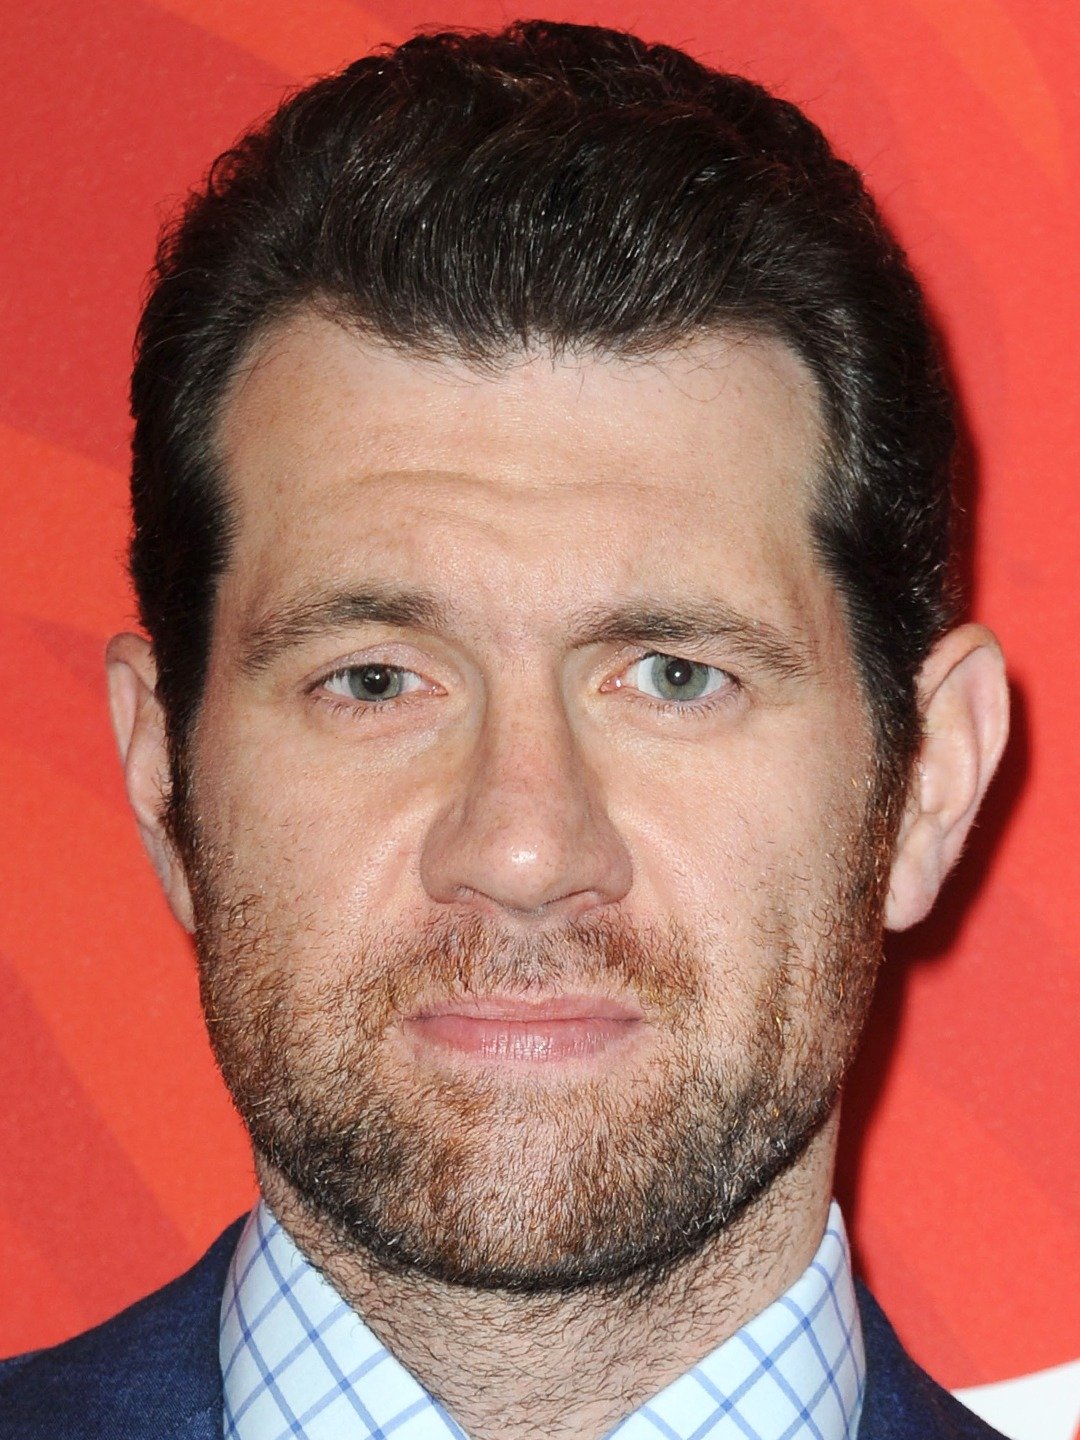 How tall is Billy Eichner?